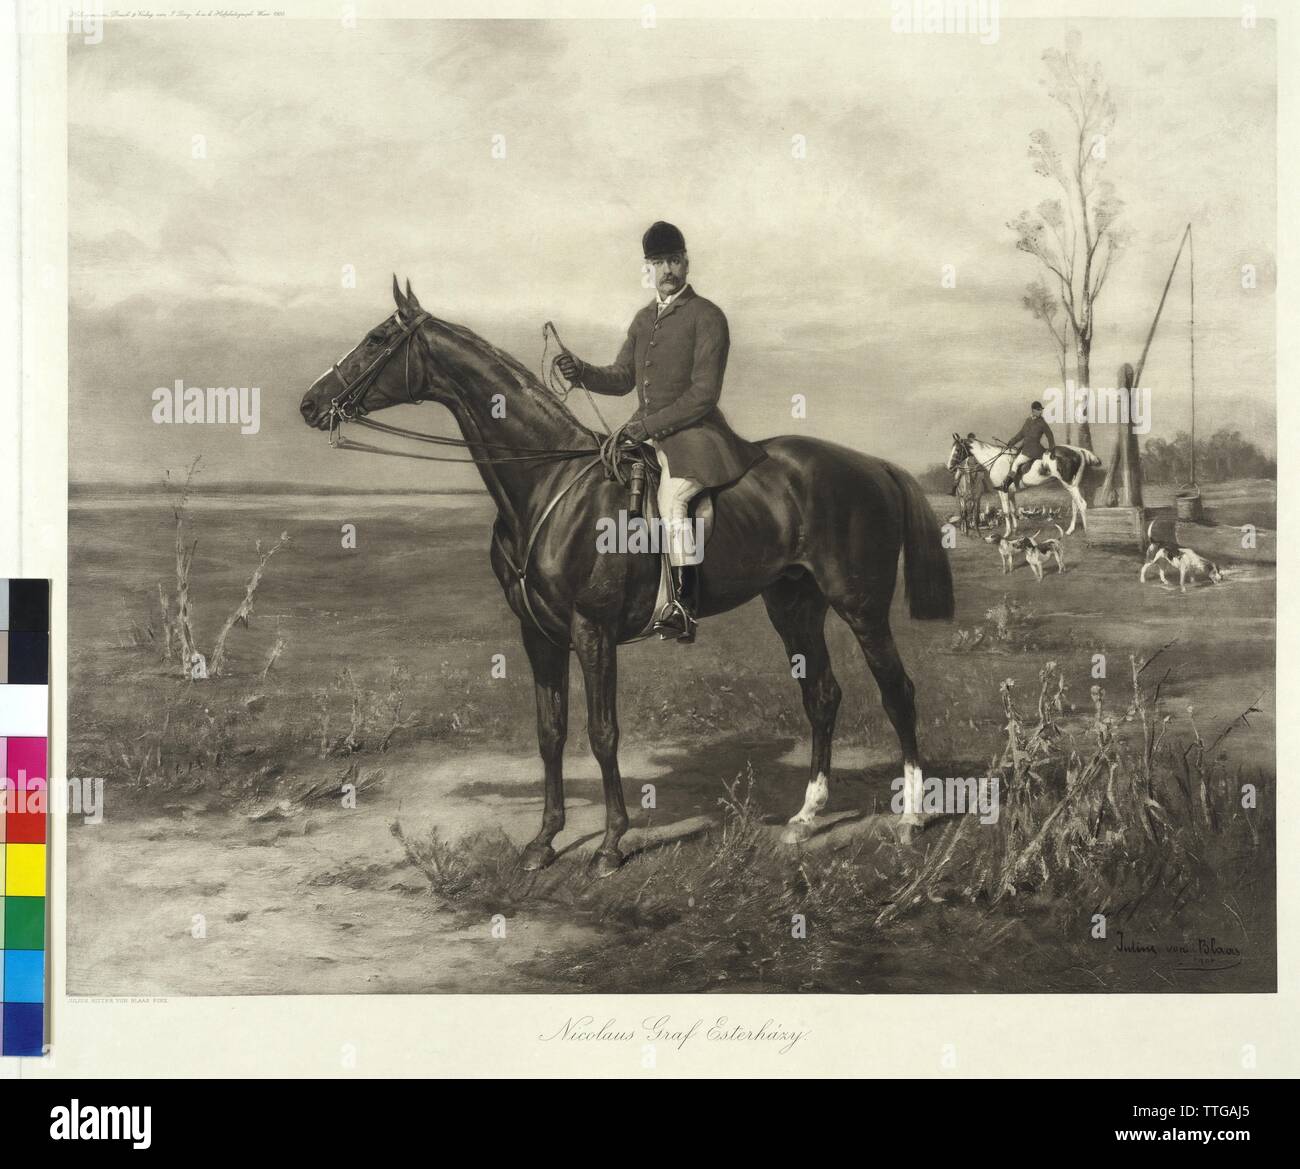 Nicolaus count Esterhazy, equestrian image in Puszta landscape. heliography based on a painting by Julius knight von Blaas, Additional-Rights-Clearance-Info-Not-Available Stock Photo